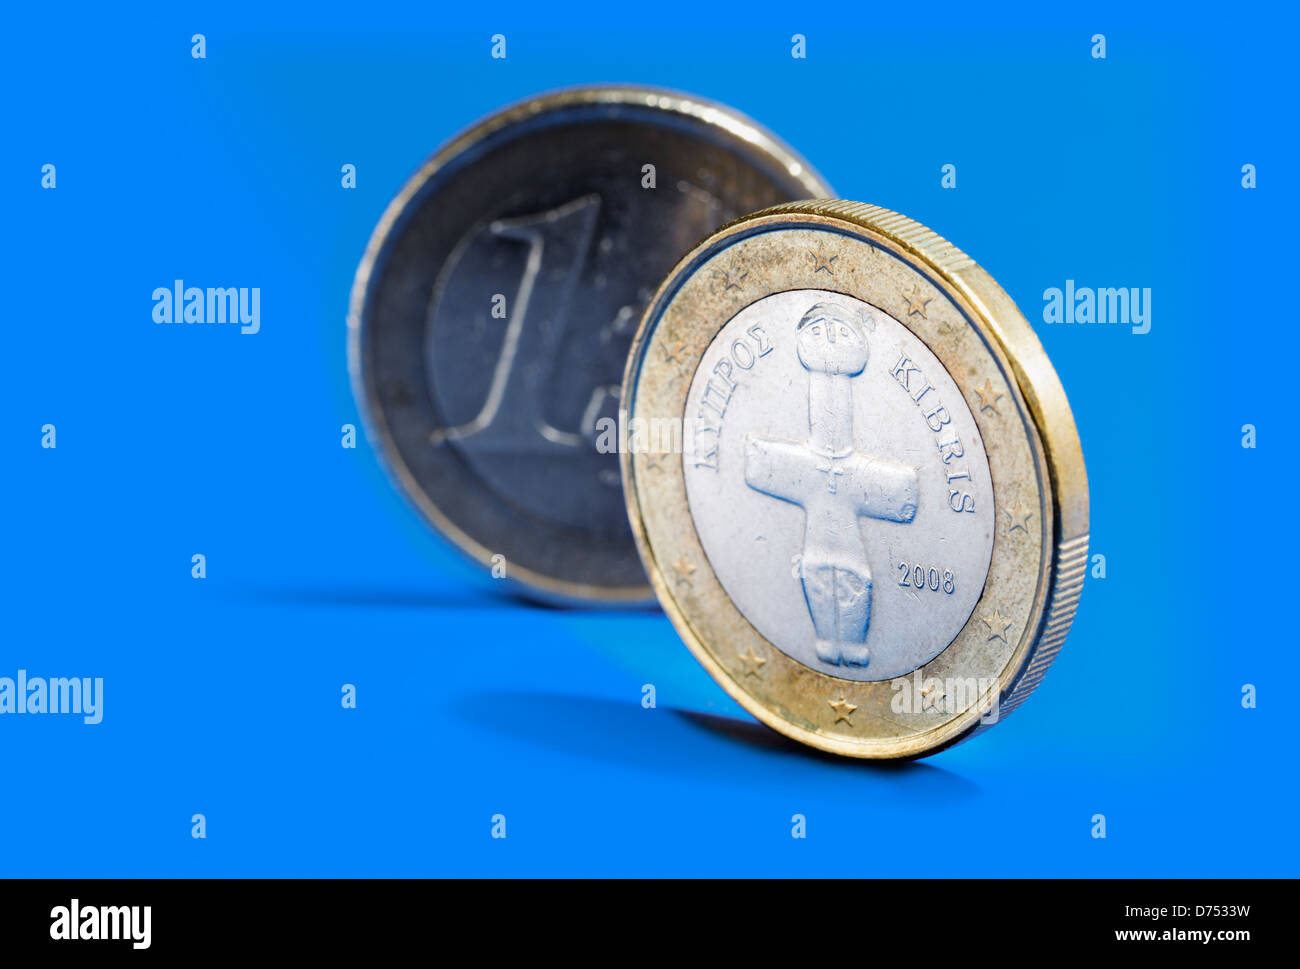 Euro coins from Cyprus on blue background. Stock Photo